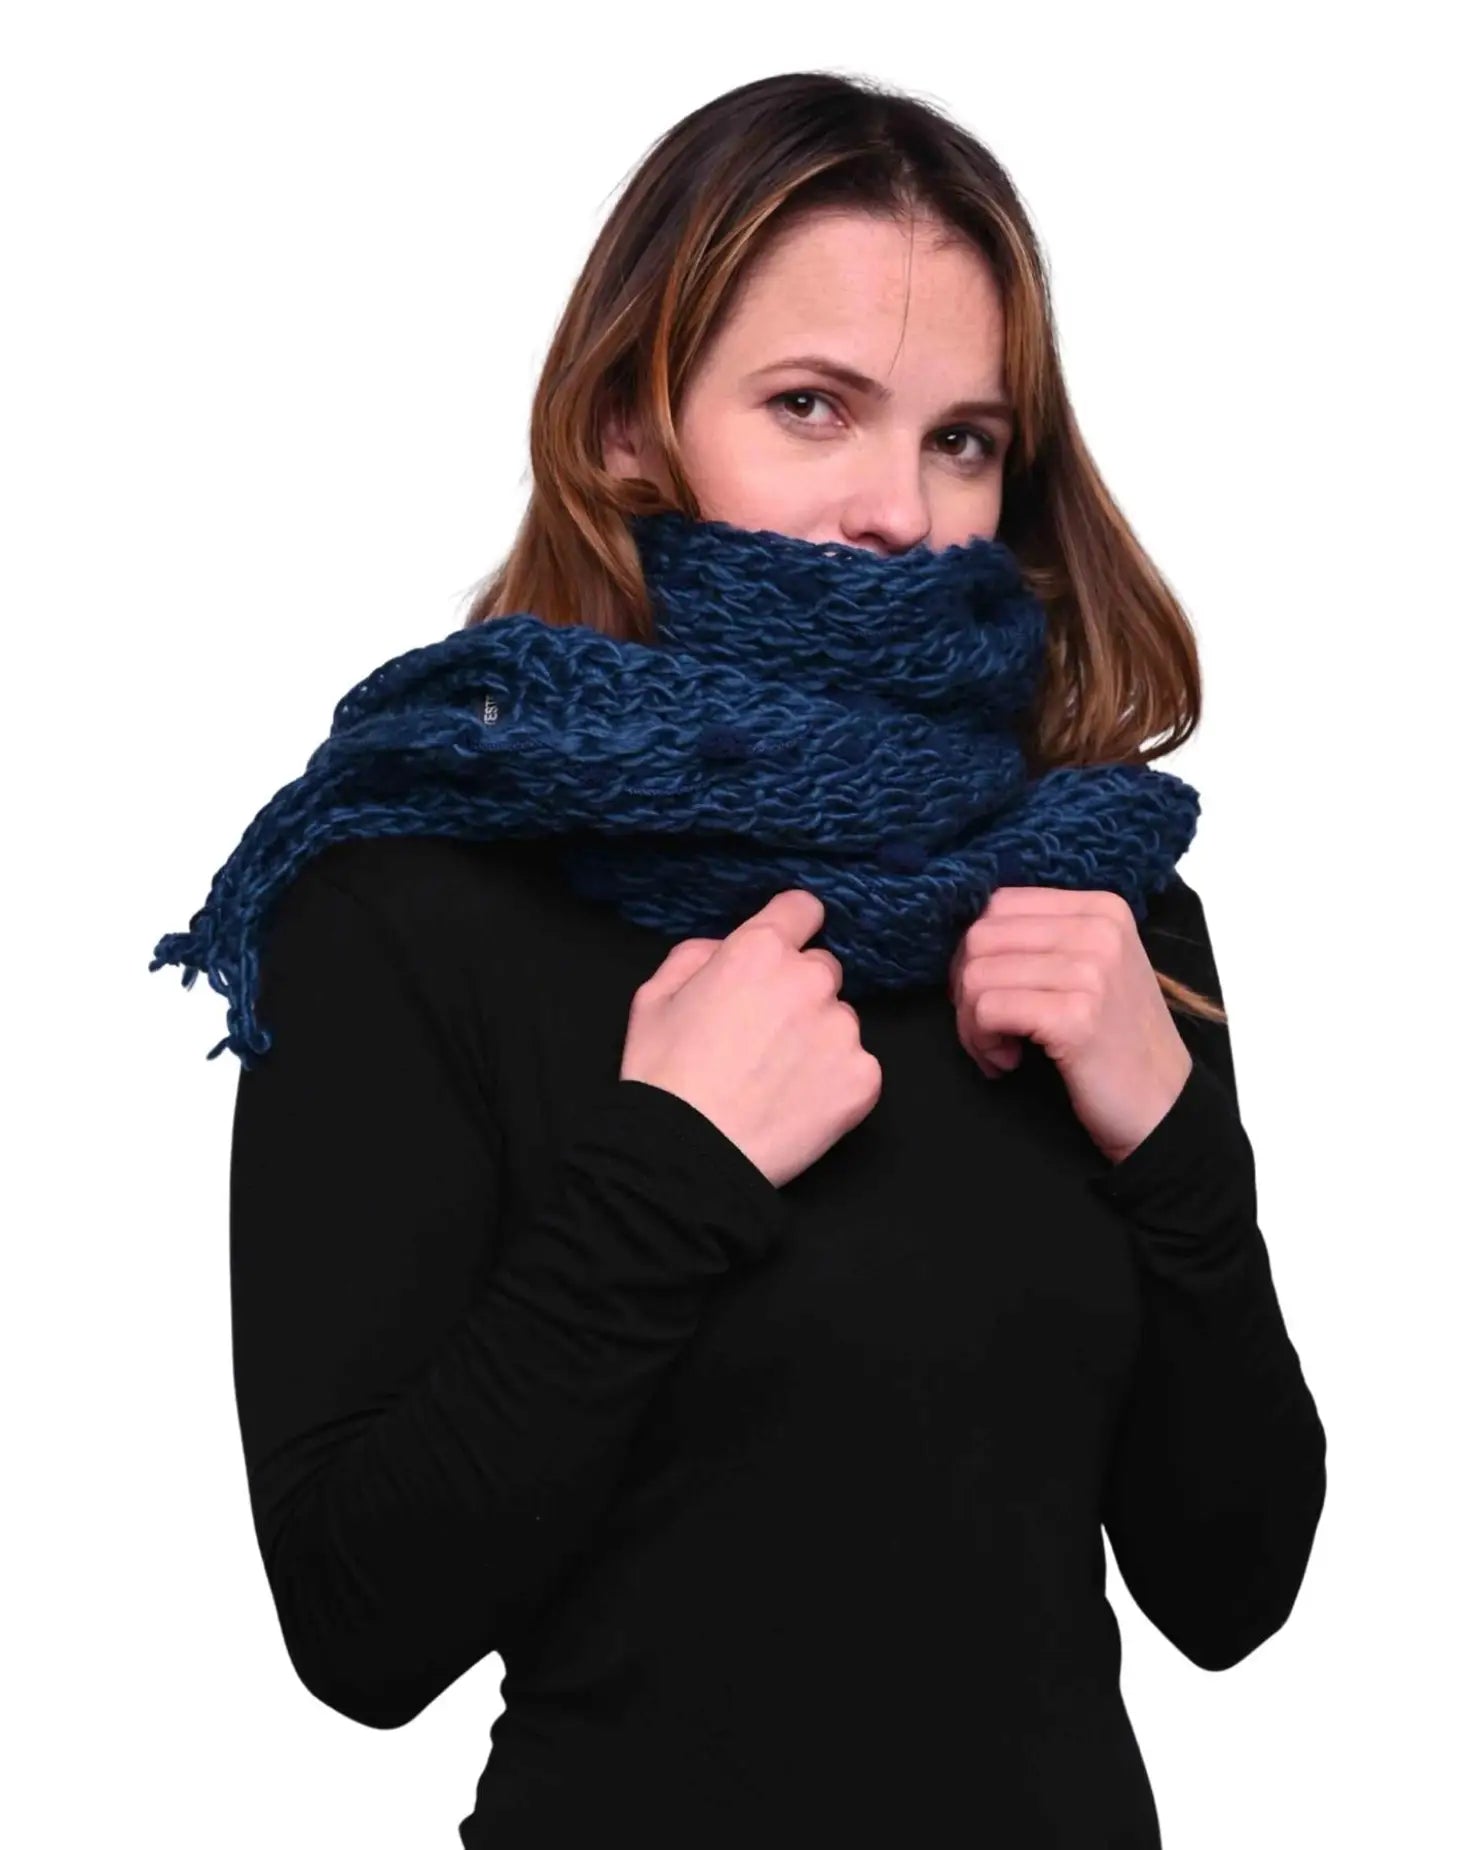 Chunky Bobble Knit Scarf in Blue for Winter Fashion